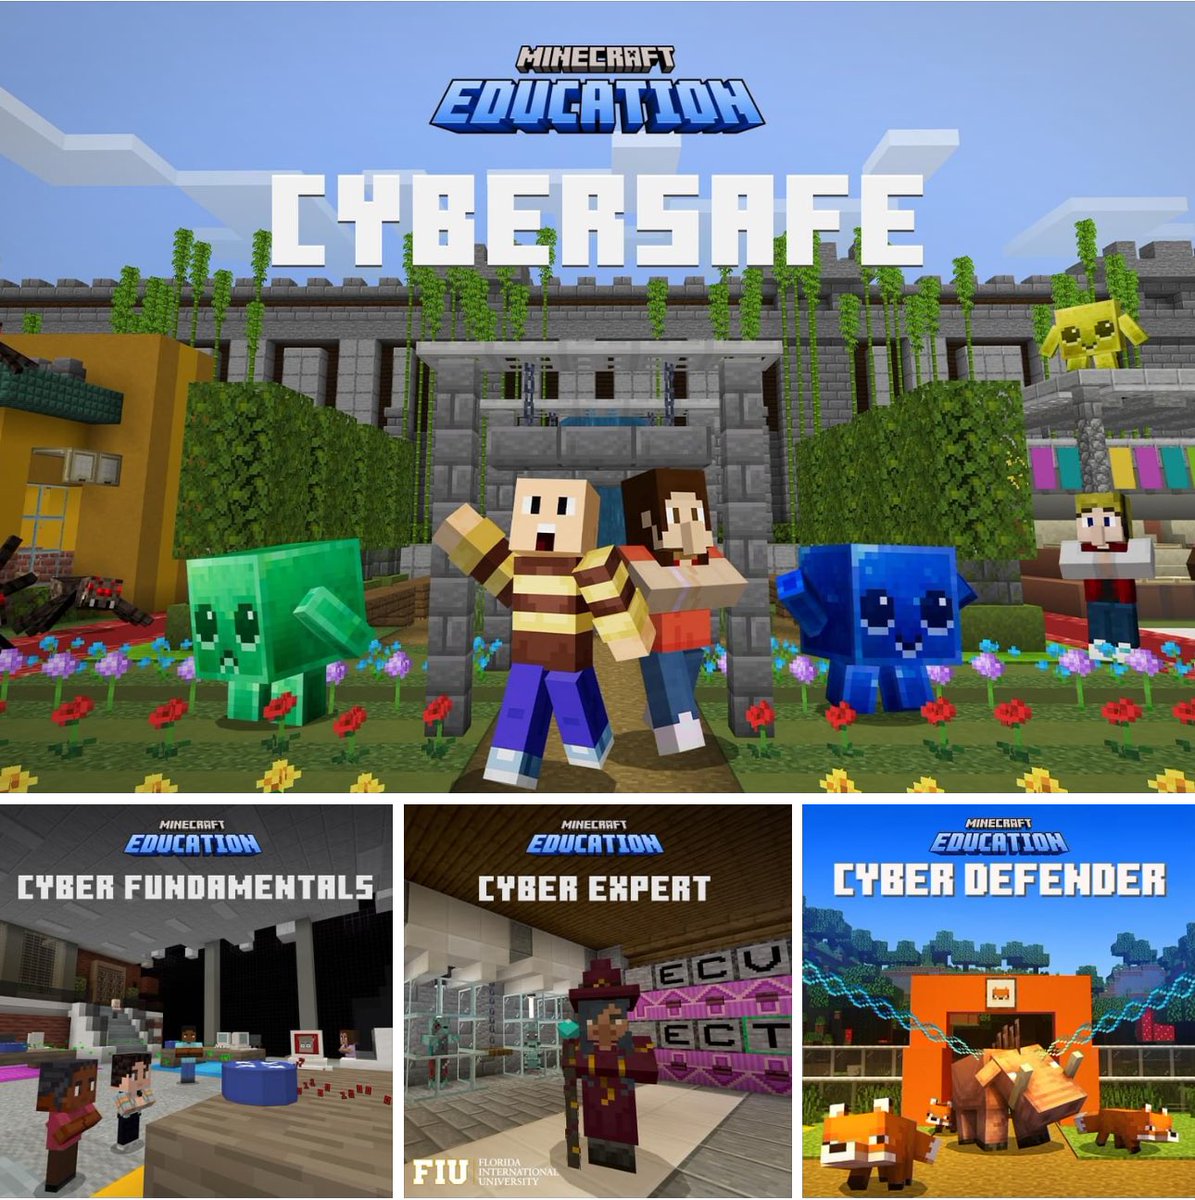 🔐Unlock the secrets of #Cybersecurity with #MinecraftEdu! Our Cyber Collection is designed to empower you and your students in creating a safer online environment. Together, we can teach responsible and safer tech use! See all our Cyber courses at aka.ms/cyber